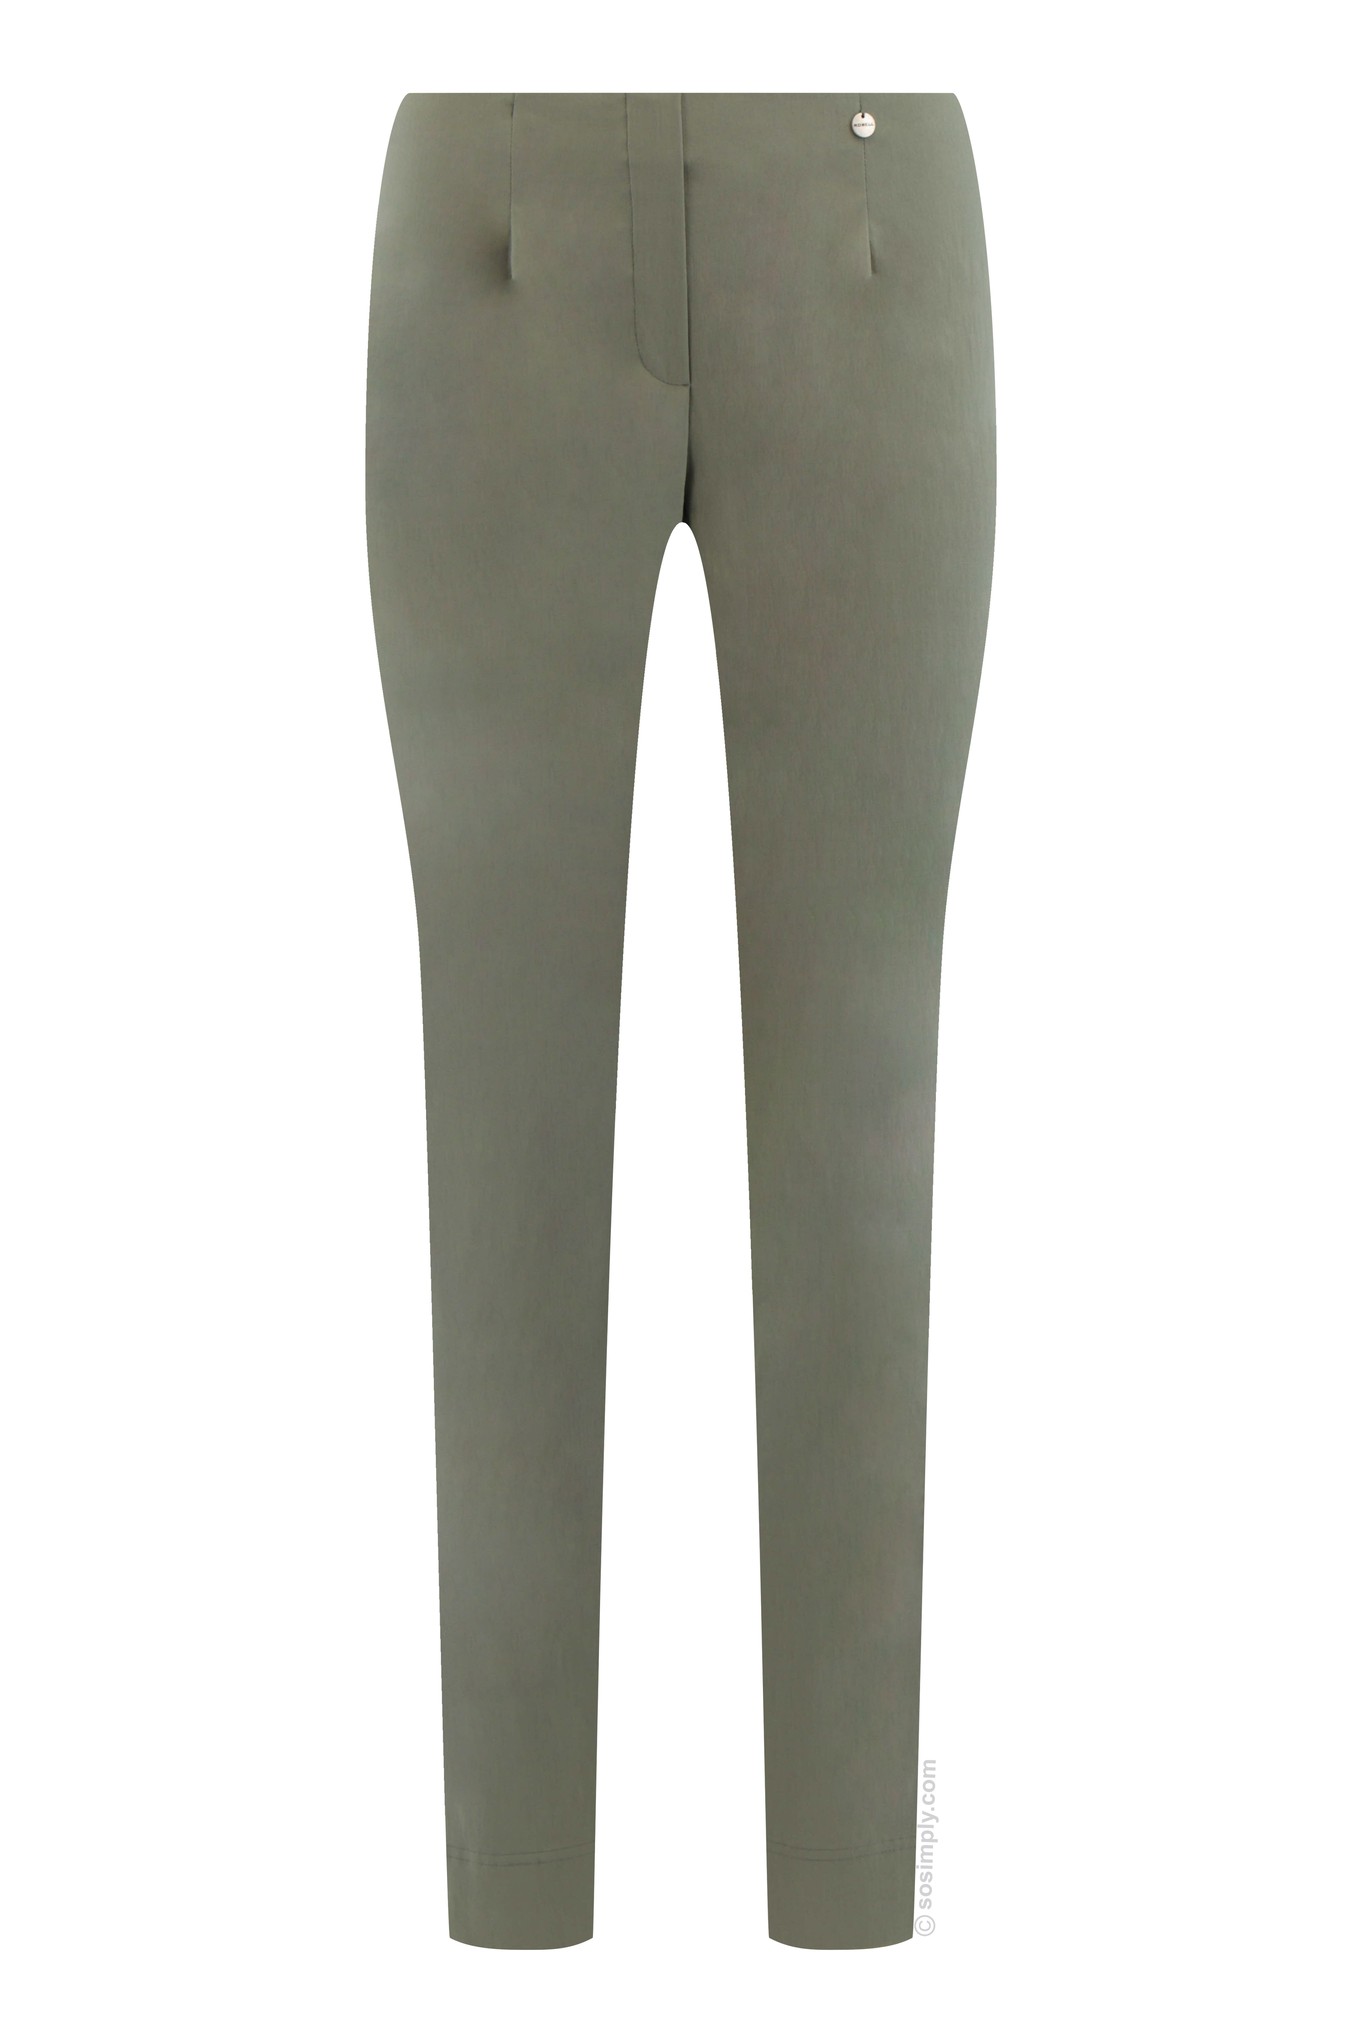 Robell Petite Trousers - Women's Petite Trousers | So Simply